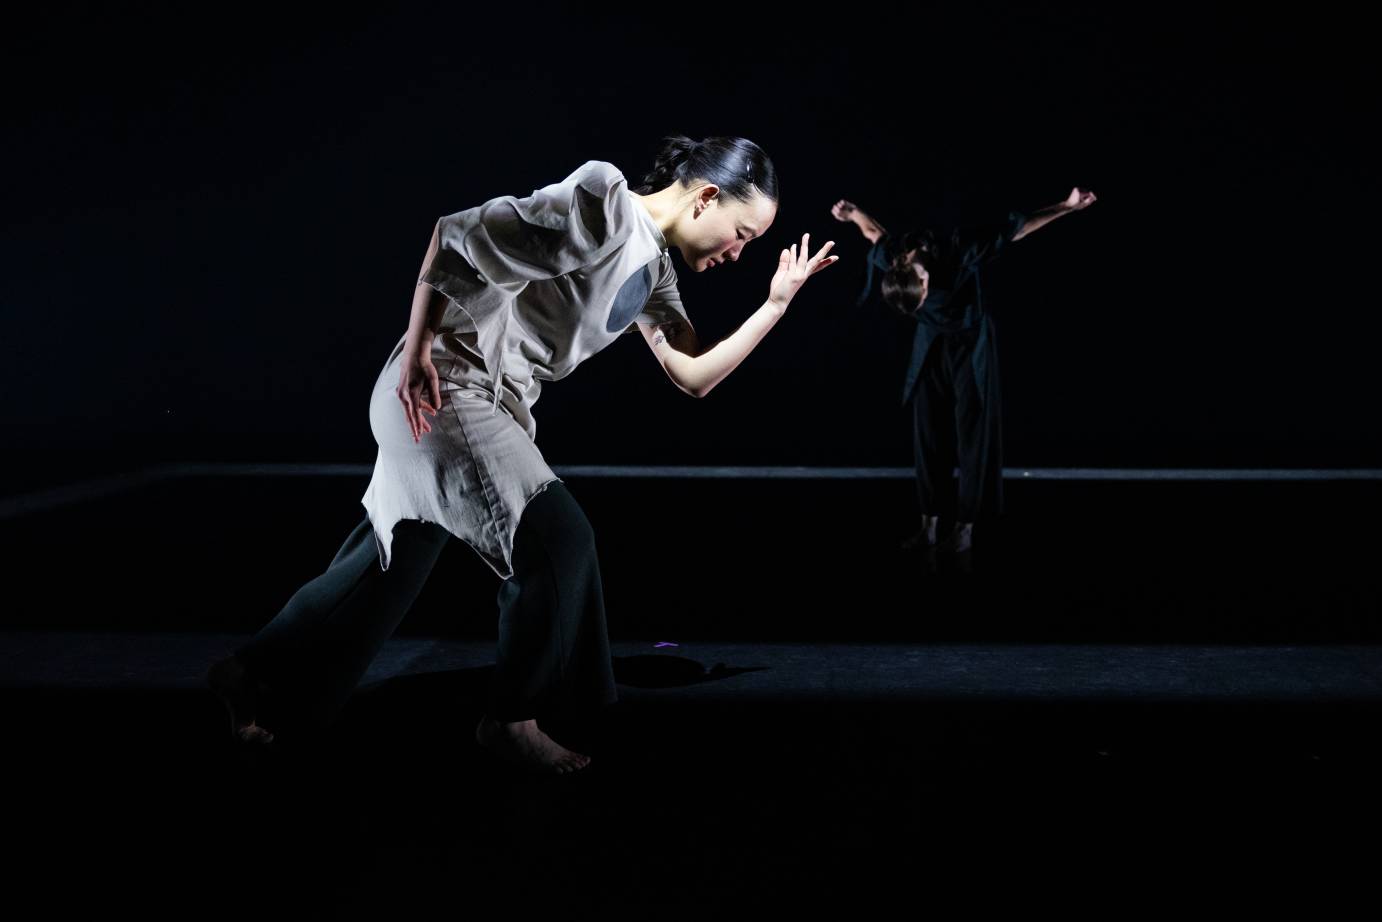 two figures on a dimly lit stage with tunics and loose pants the woman in the foreground is more brightly lit and we look at her profile, the woman in the back is bowing towards us. She blends into the black background and floor save for her arms, hair and parts of her face.